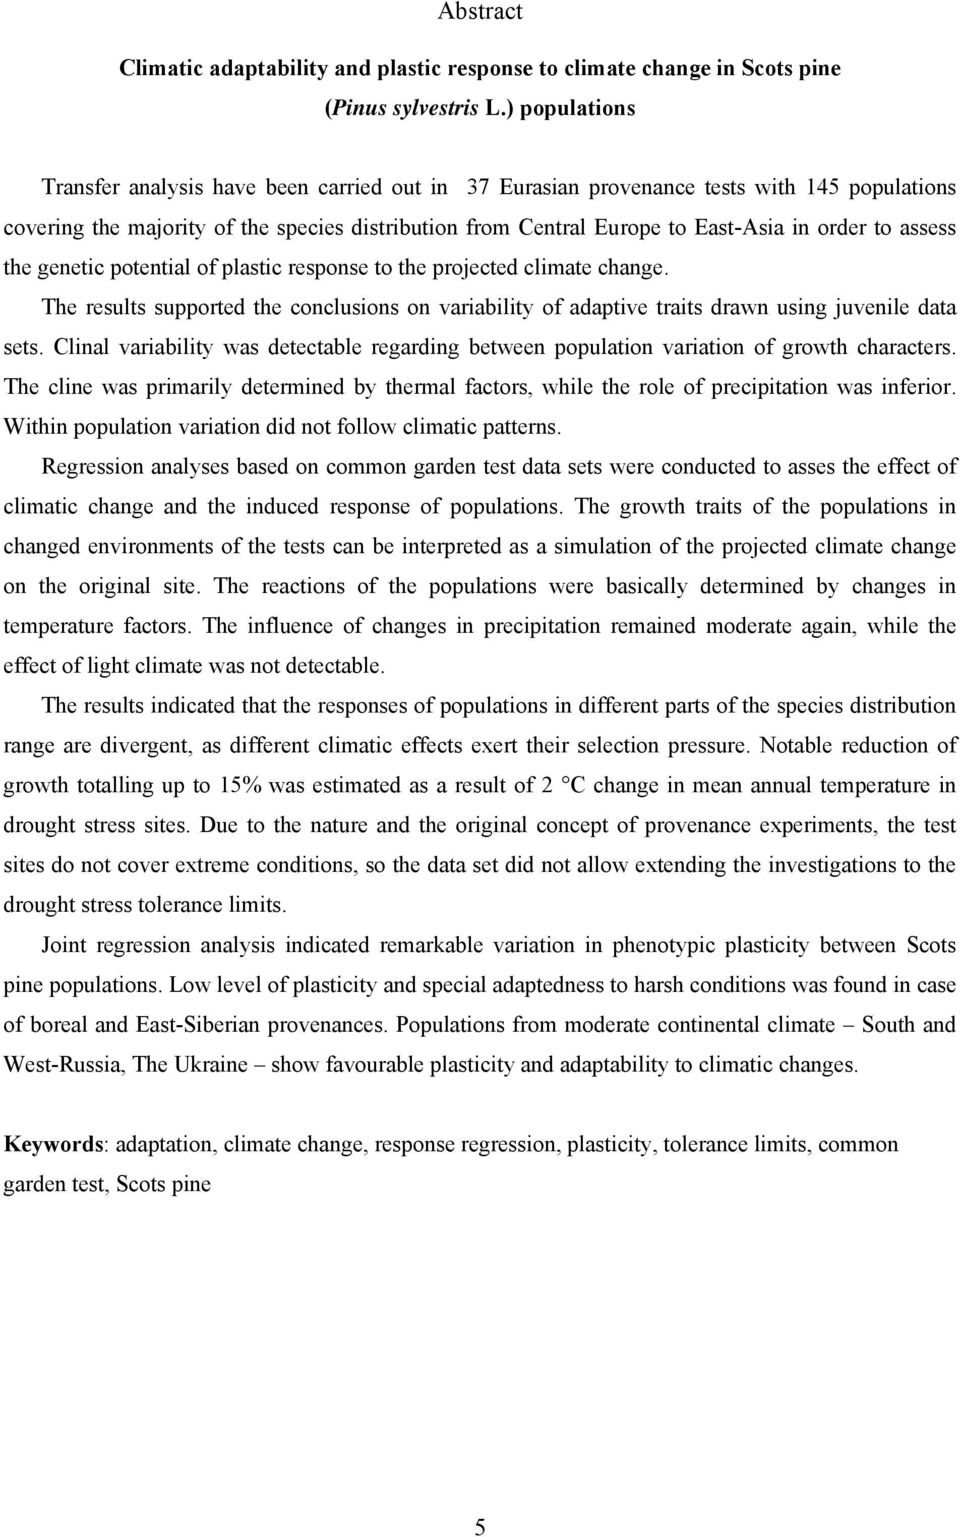 to assess the genetic potential of plastic response to the projected climate change. The results supported the conclusions on variability of adaptive traits drawn using juvenile data sets.